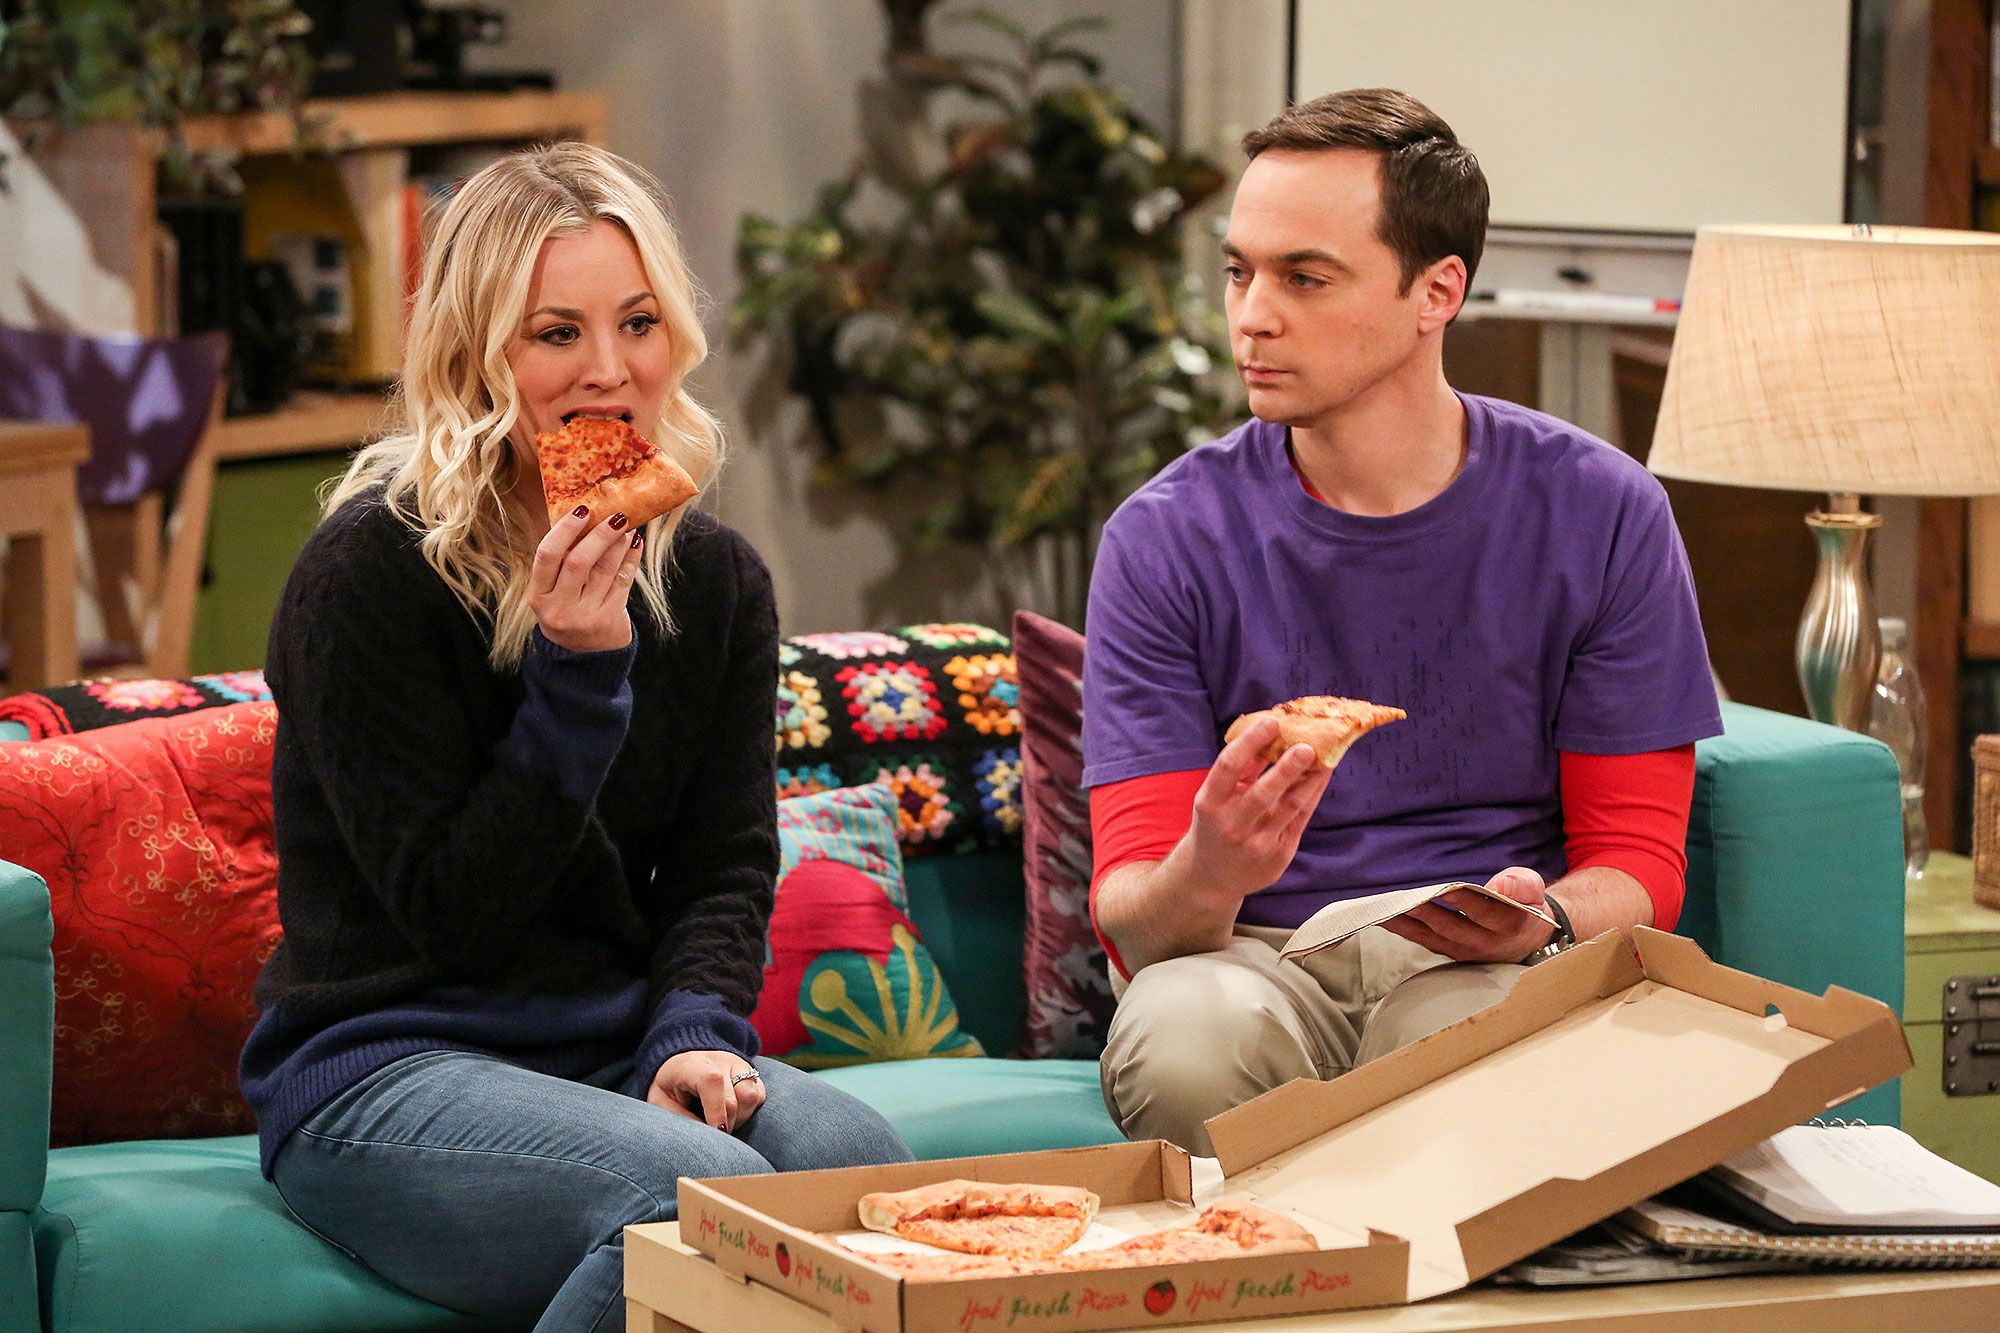 Kaley Cuoco as Penny and Jim Parsons as Sheldon eating pizza on 'The Big Bang Theory'